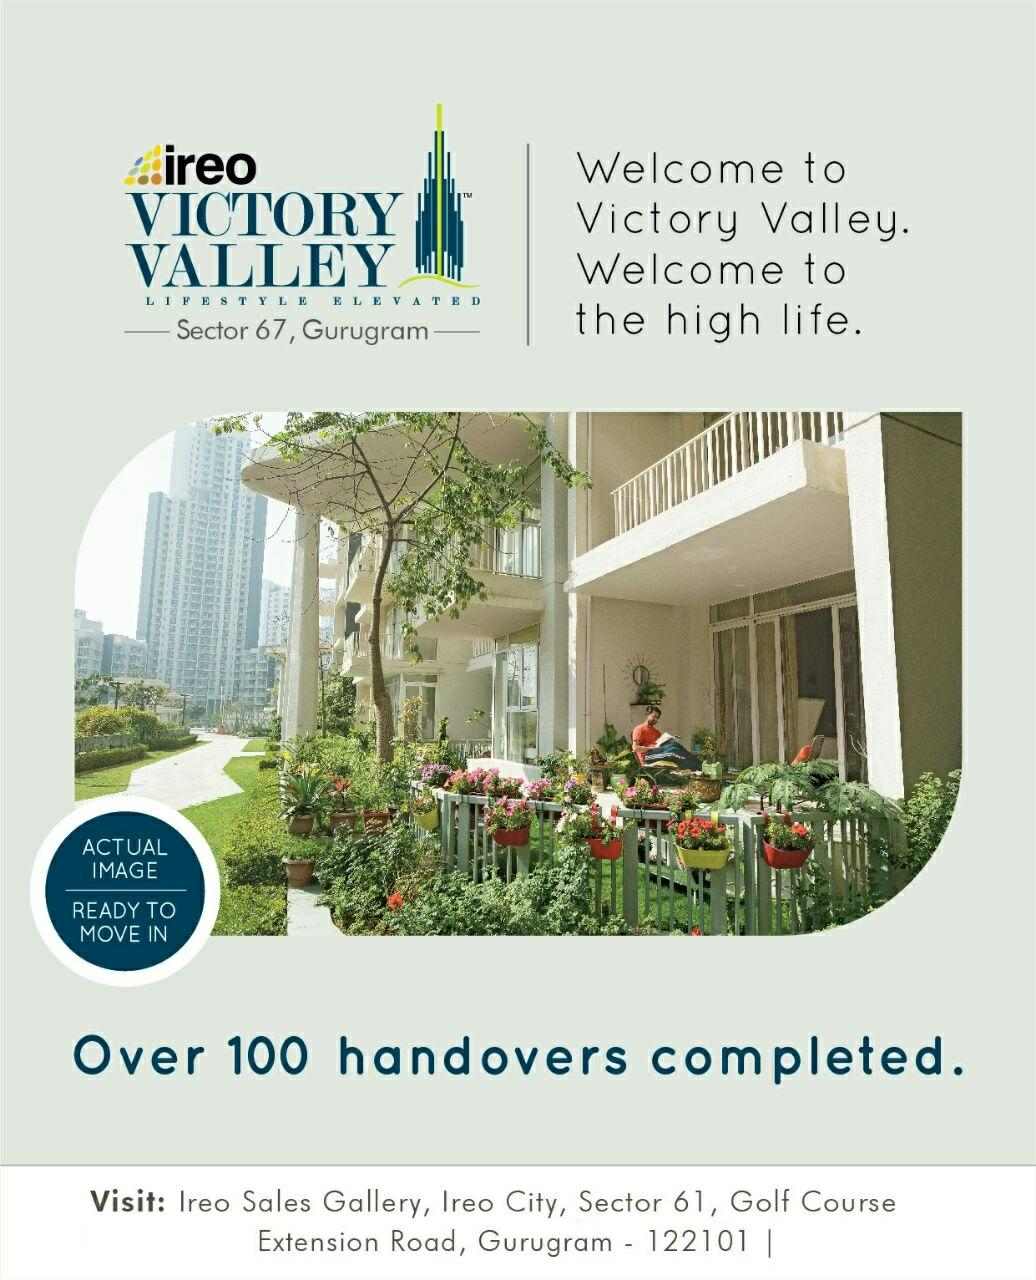 Ireo Victory Valley is ready to move in Gurgaon